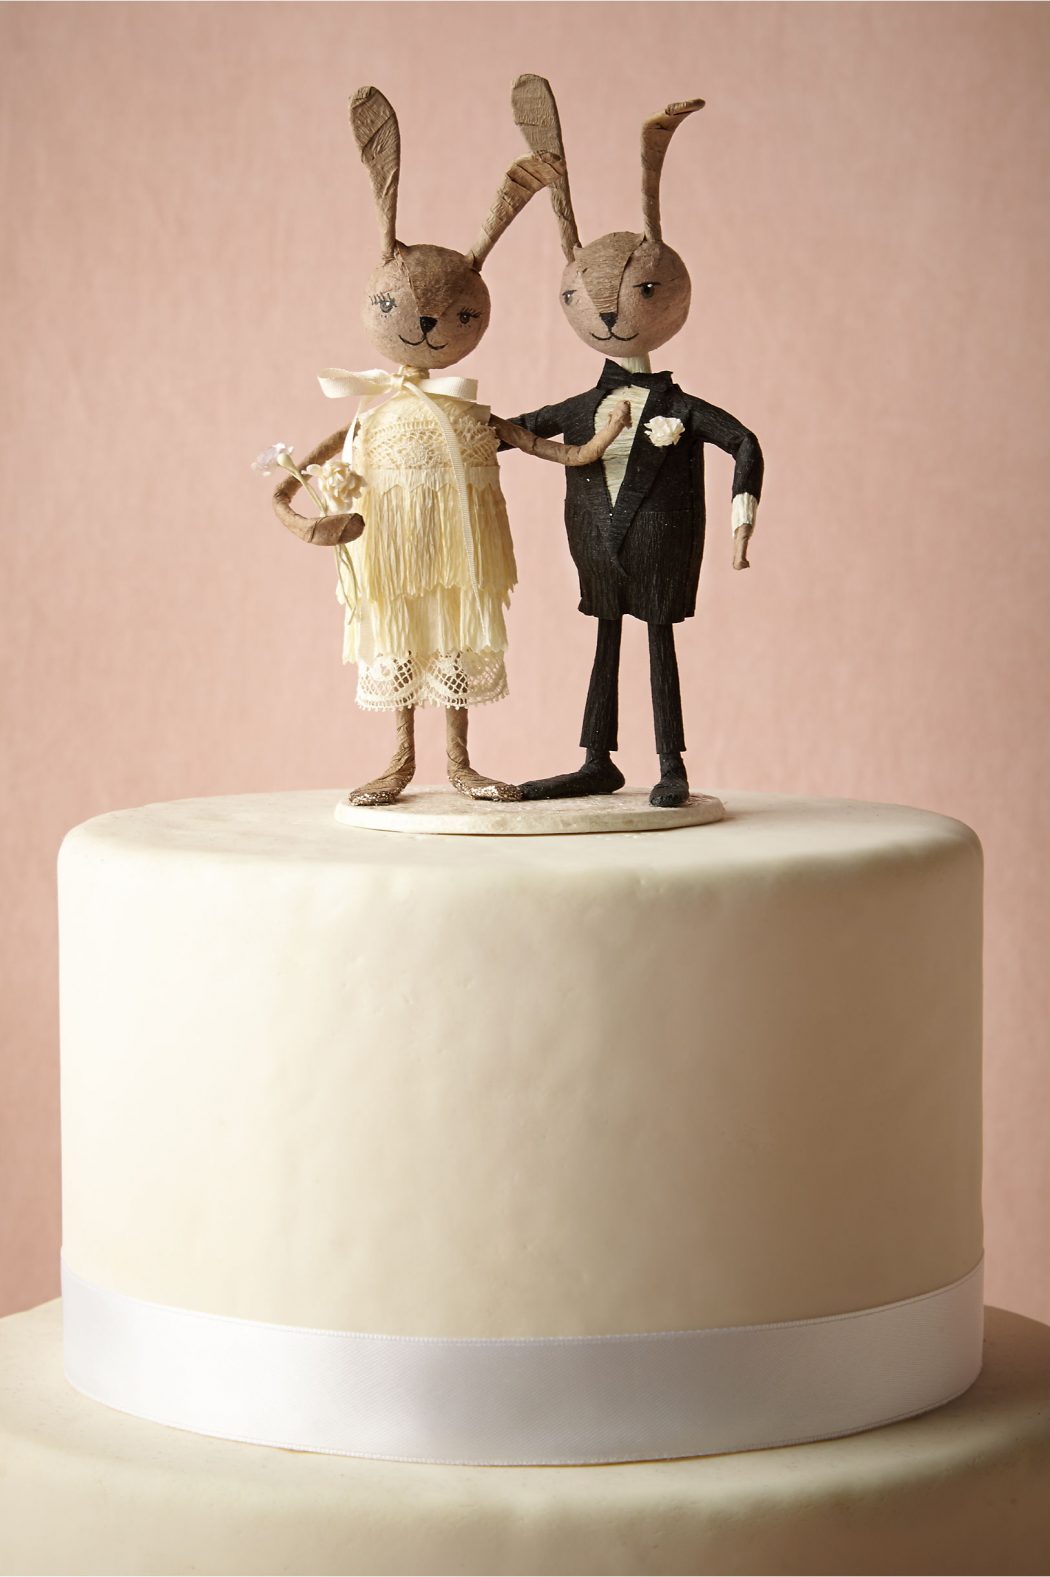 31959166_015_a Top 10 Most Unique and Funny Wedding Cake Toppers 2019